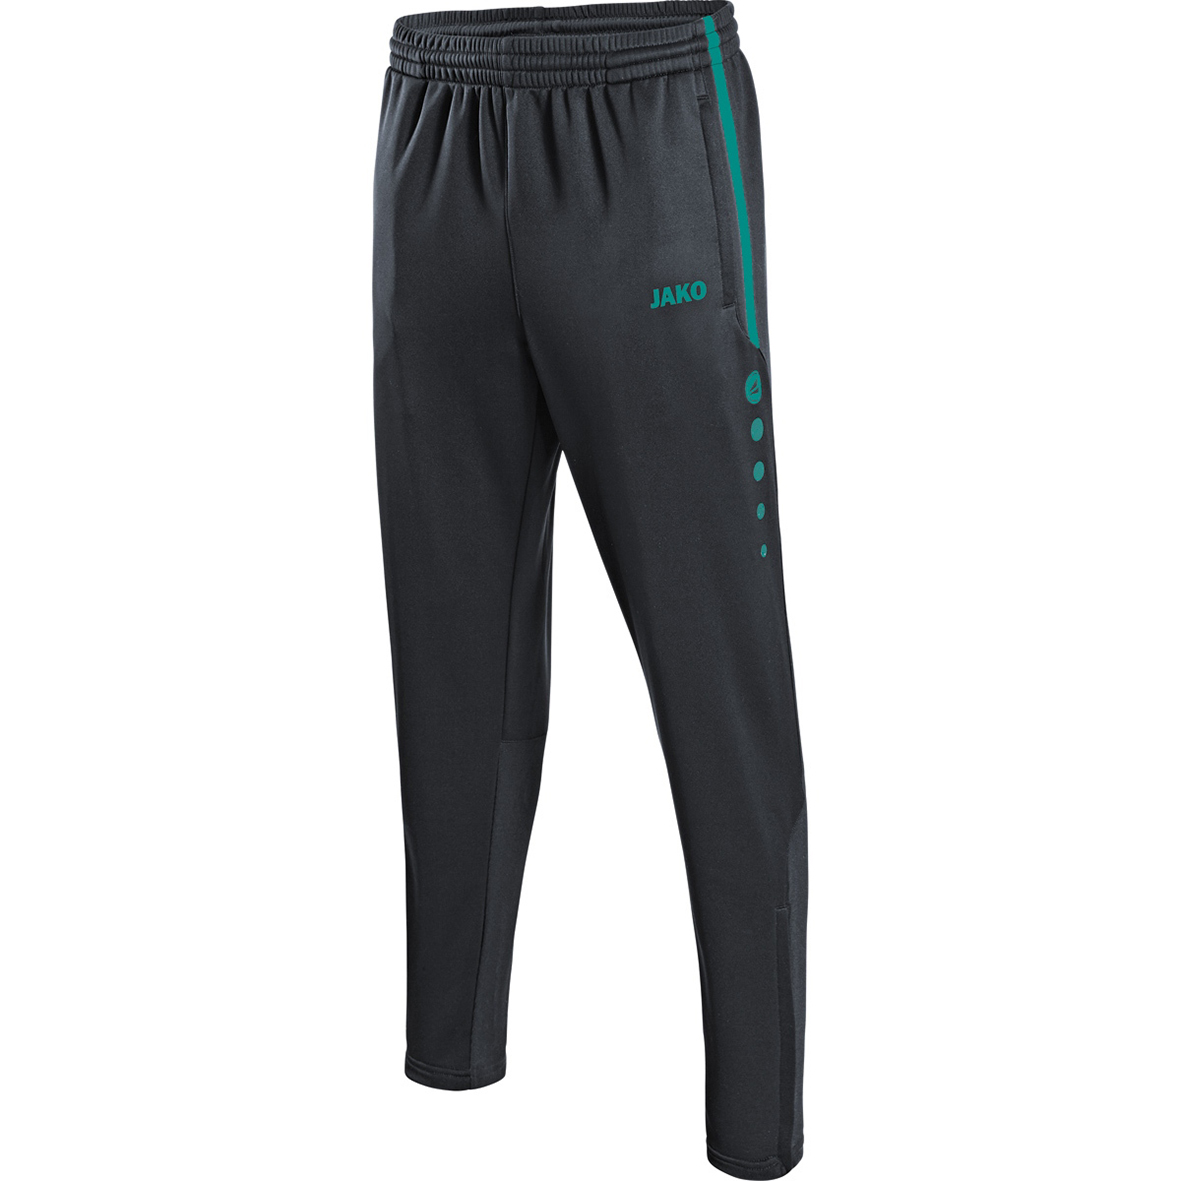 JAKO TRAINING TROUSERS ACTIVE ANTHRACITE-TURQUOISE MEN.